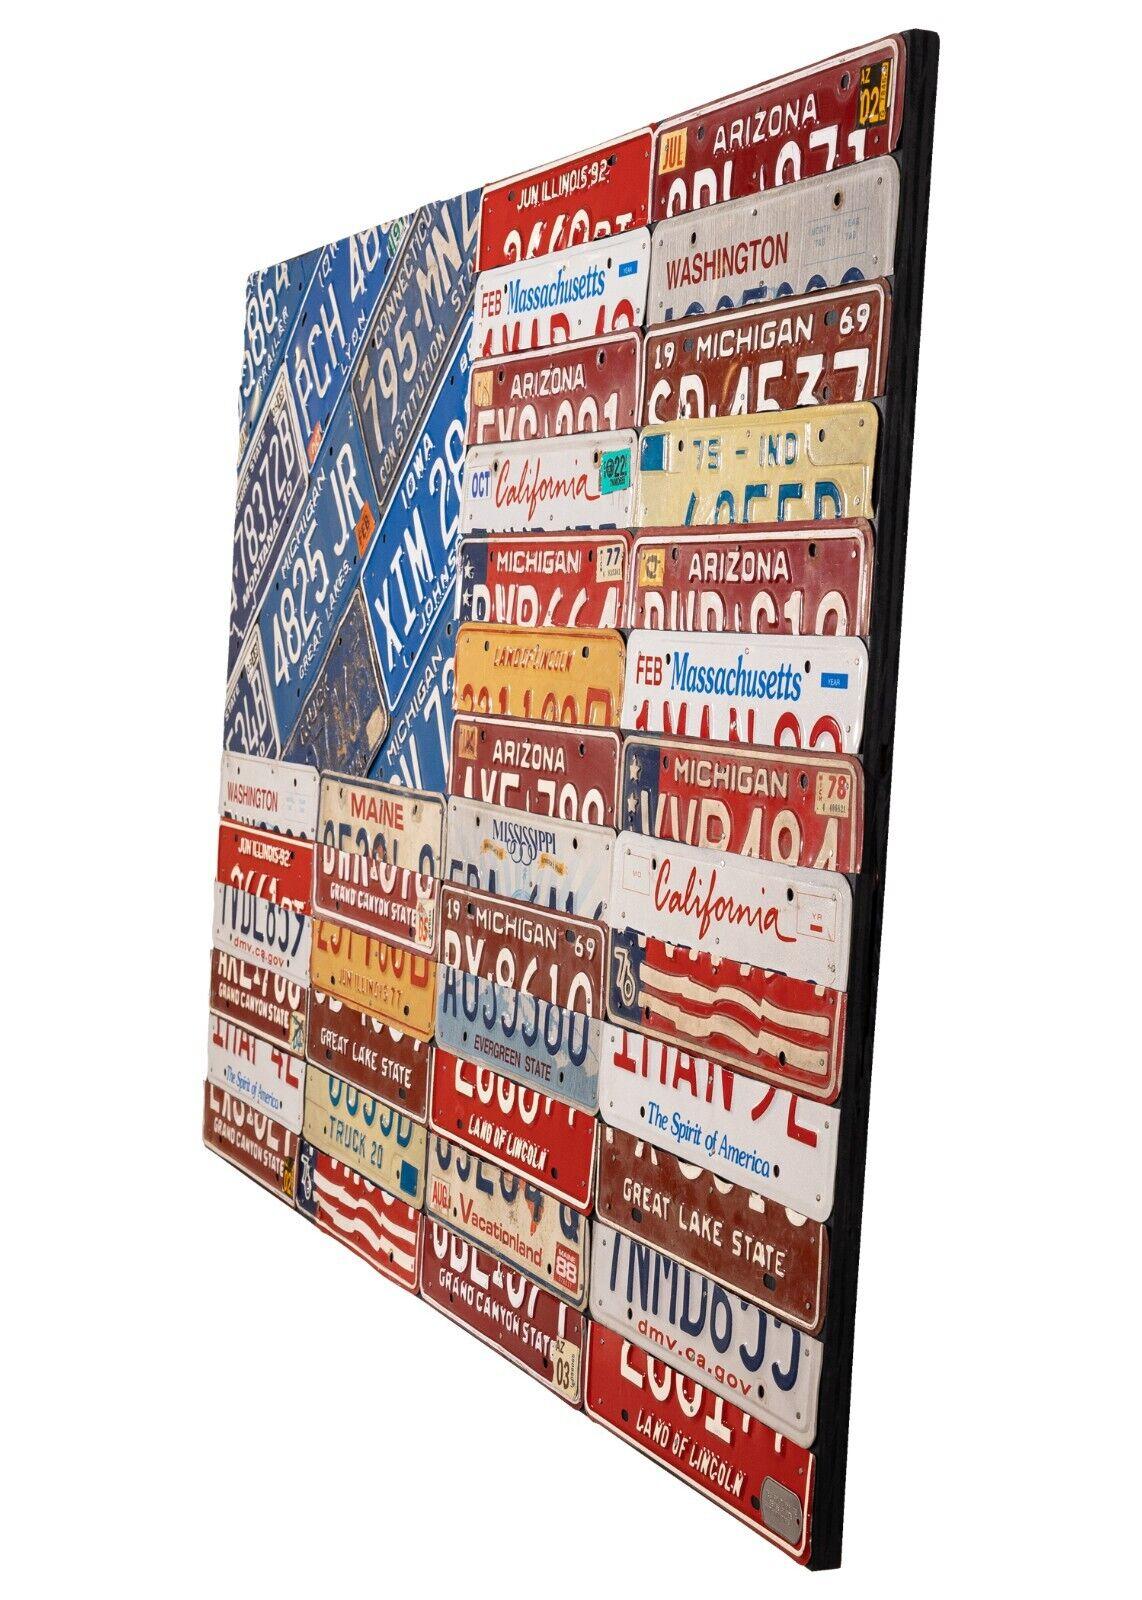 Celebrate our nation's rich automotive history with an impressive flag of the United States made completely from vintage license plates from various states. Each one in this ongoing series is unique and repurposes red, white and blue plates in a